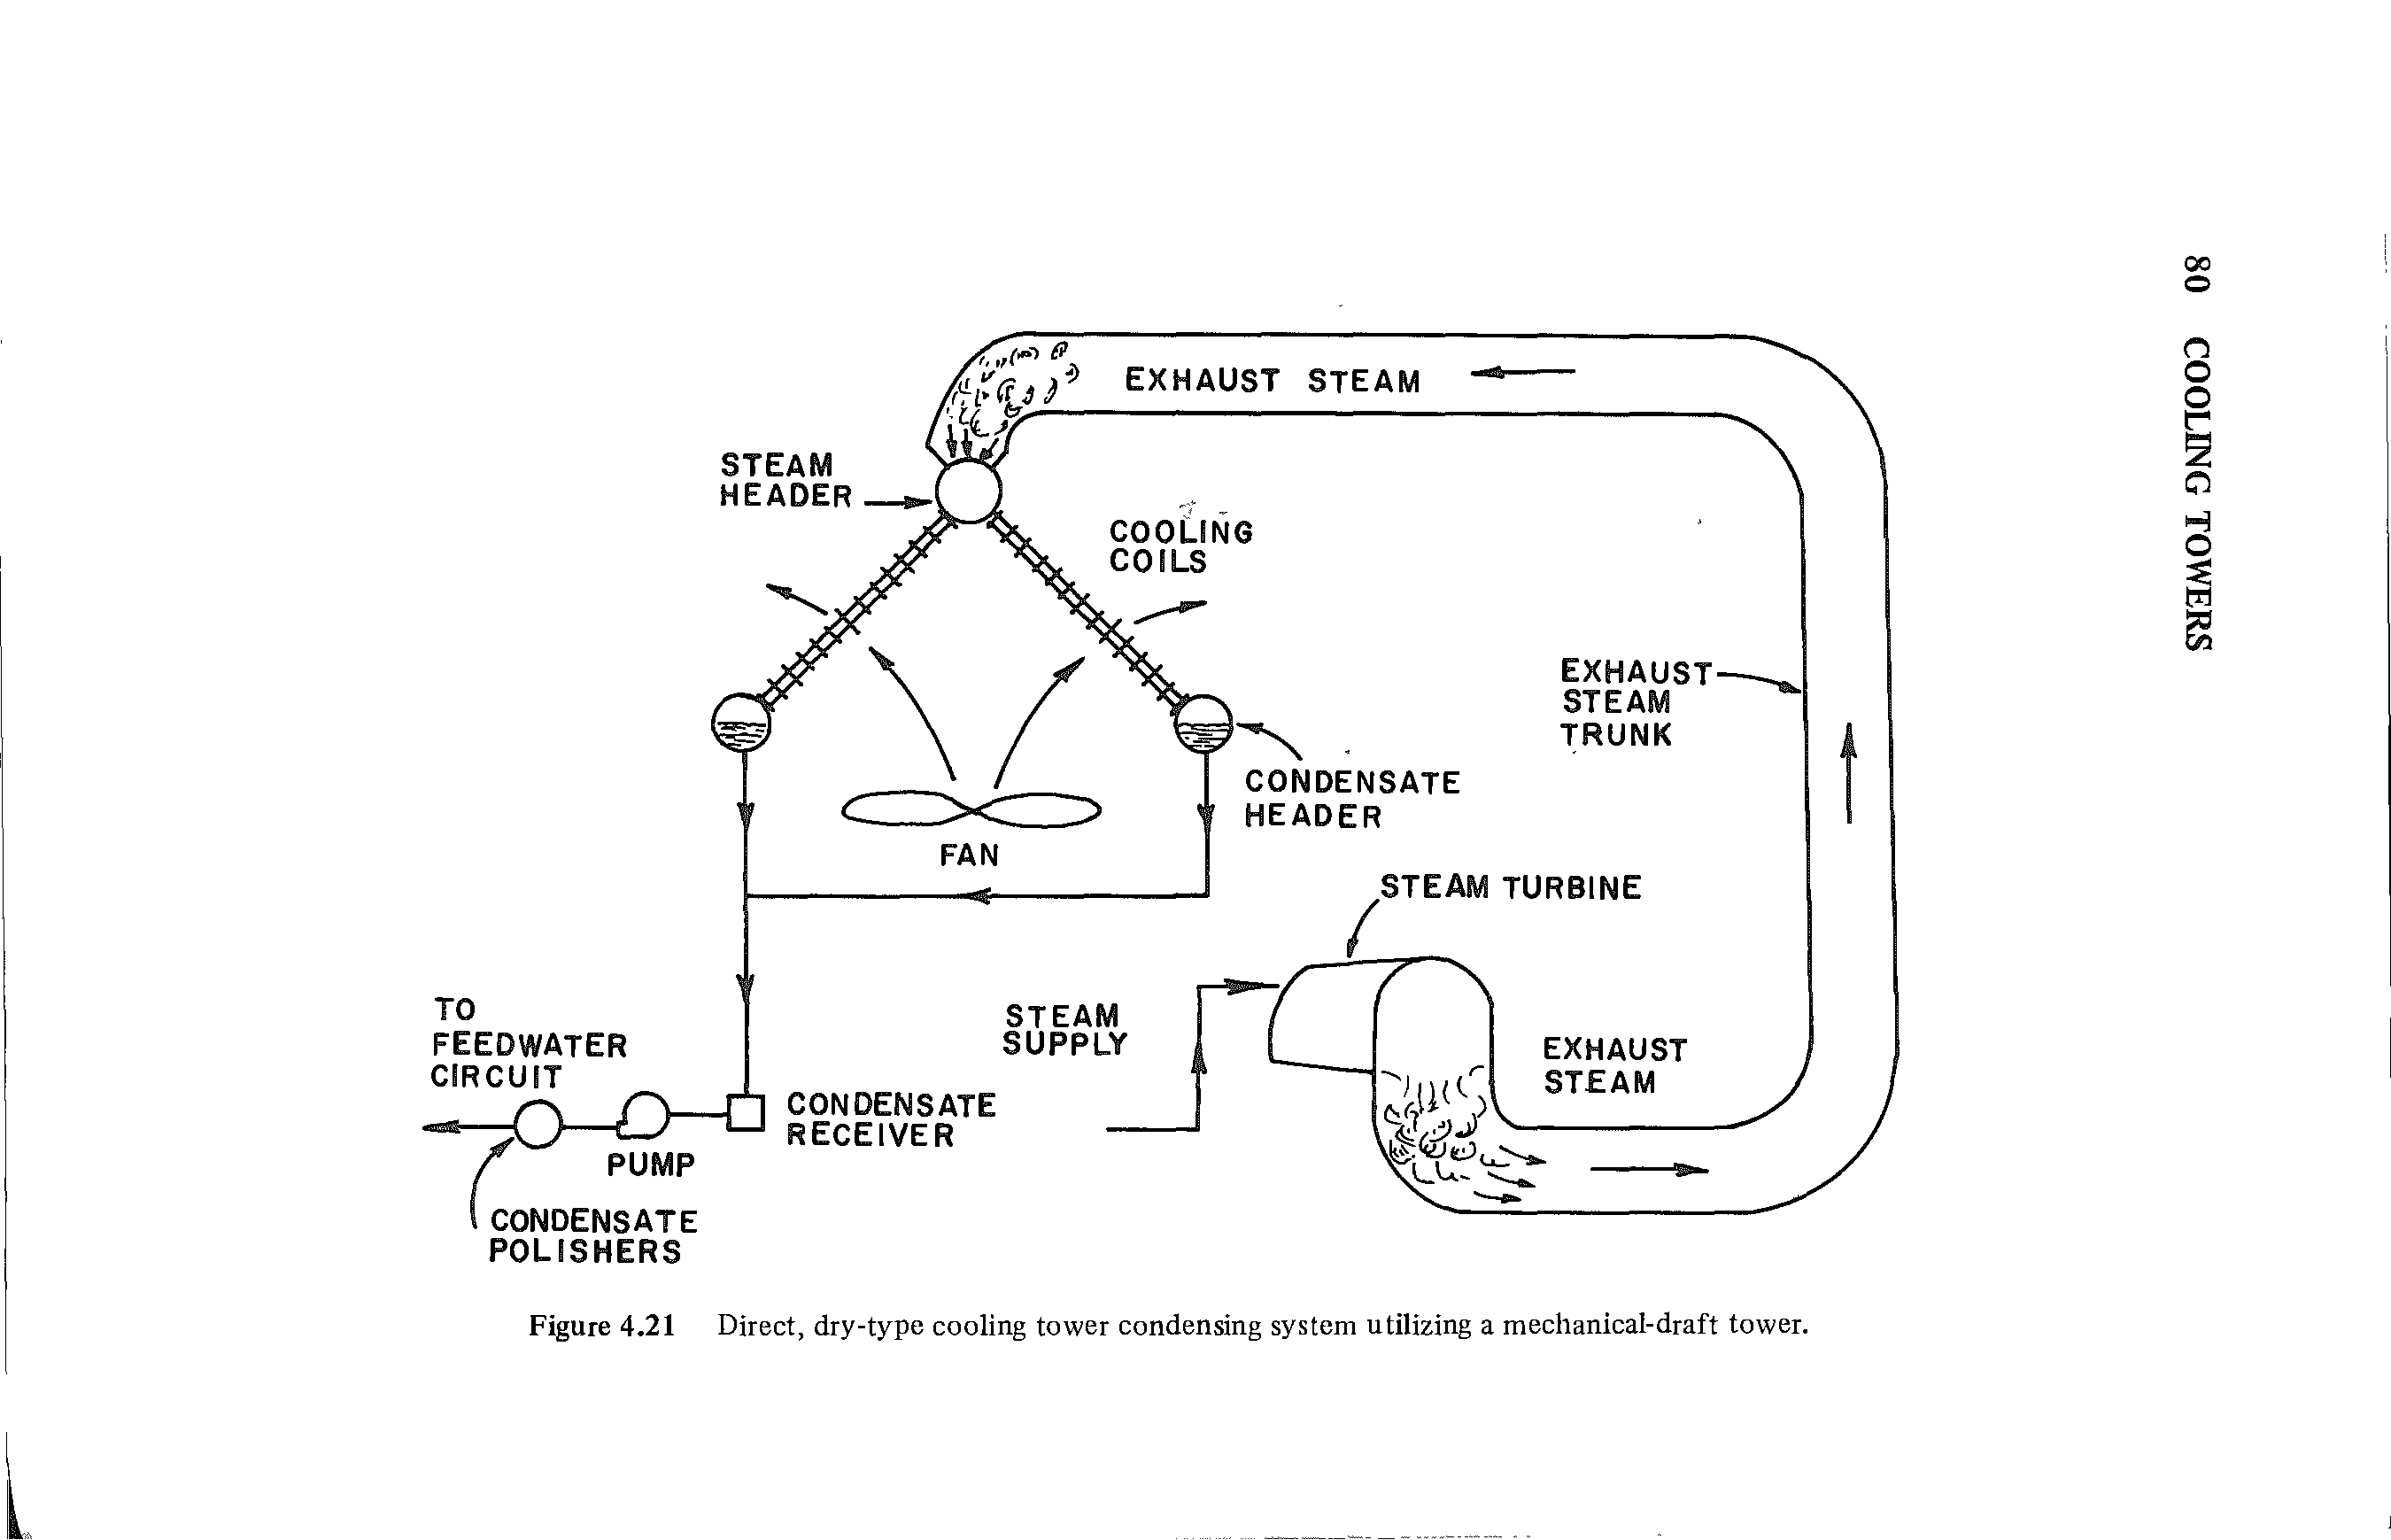 Figure 4.21 Direct, dry-type cooling tower condensing system utilizing a mechanical-draft tower.